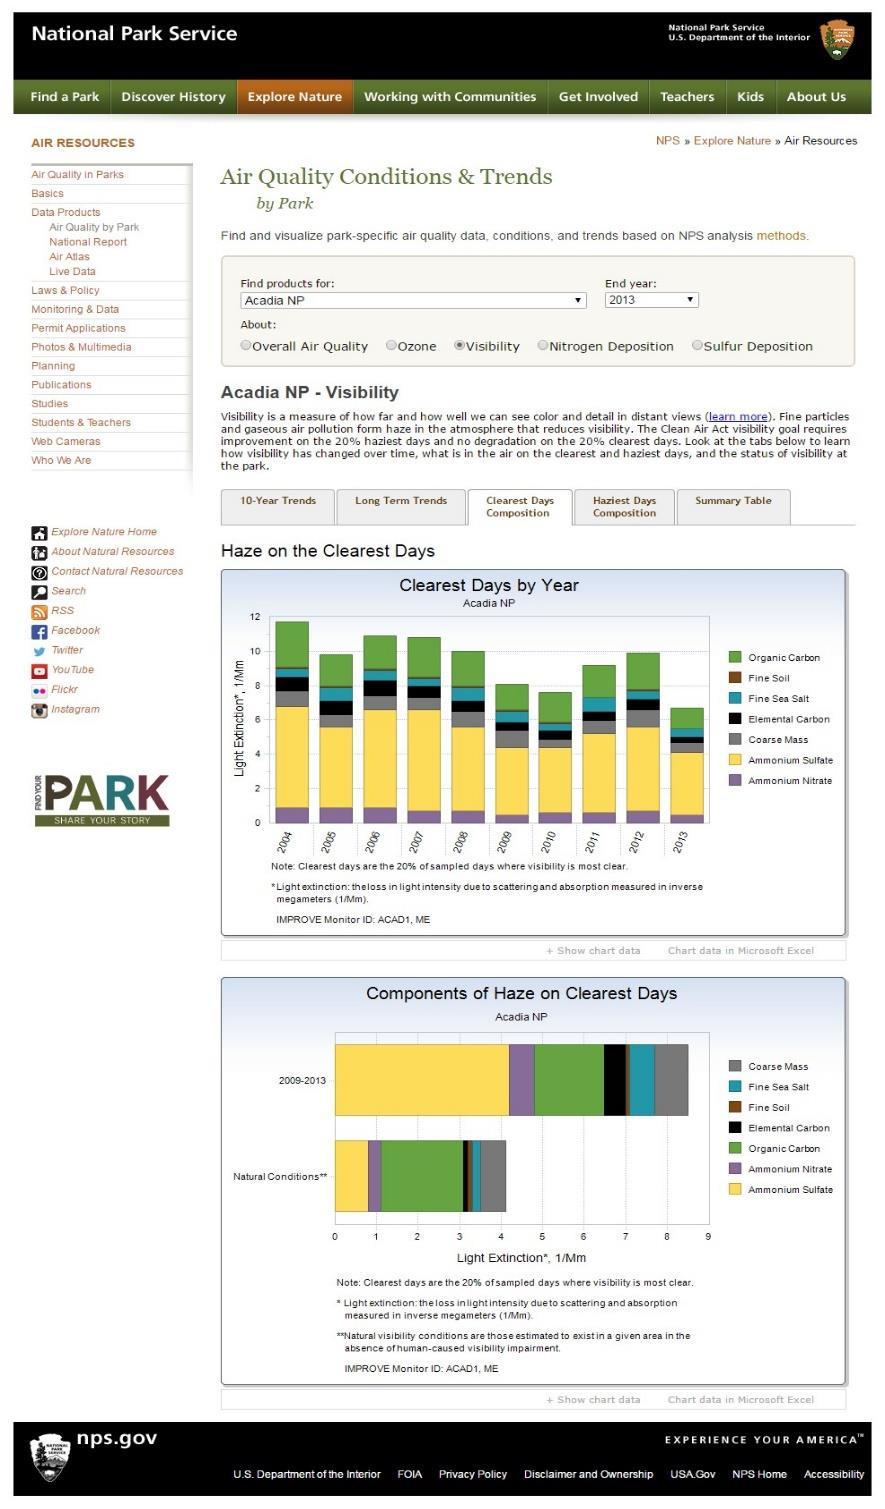 NPS Air Quality Conditions & Trends Tools (nps.